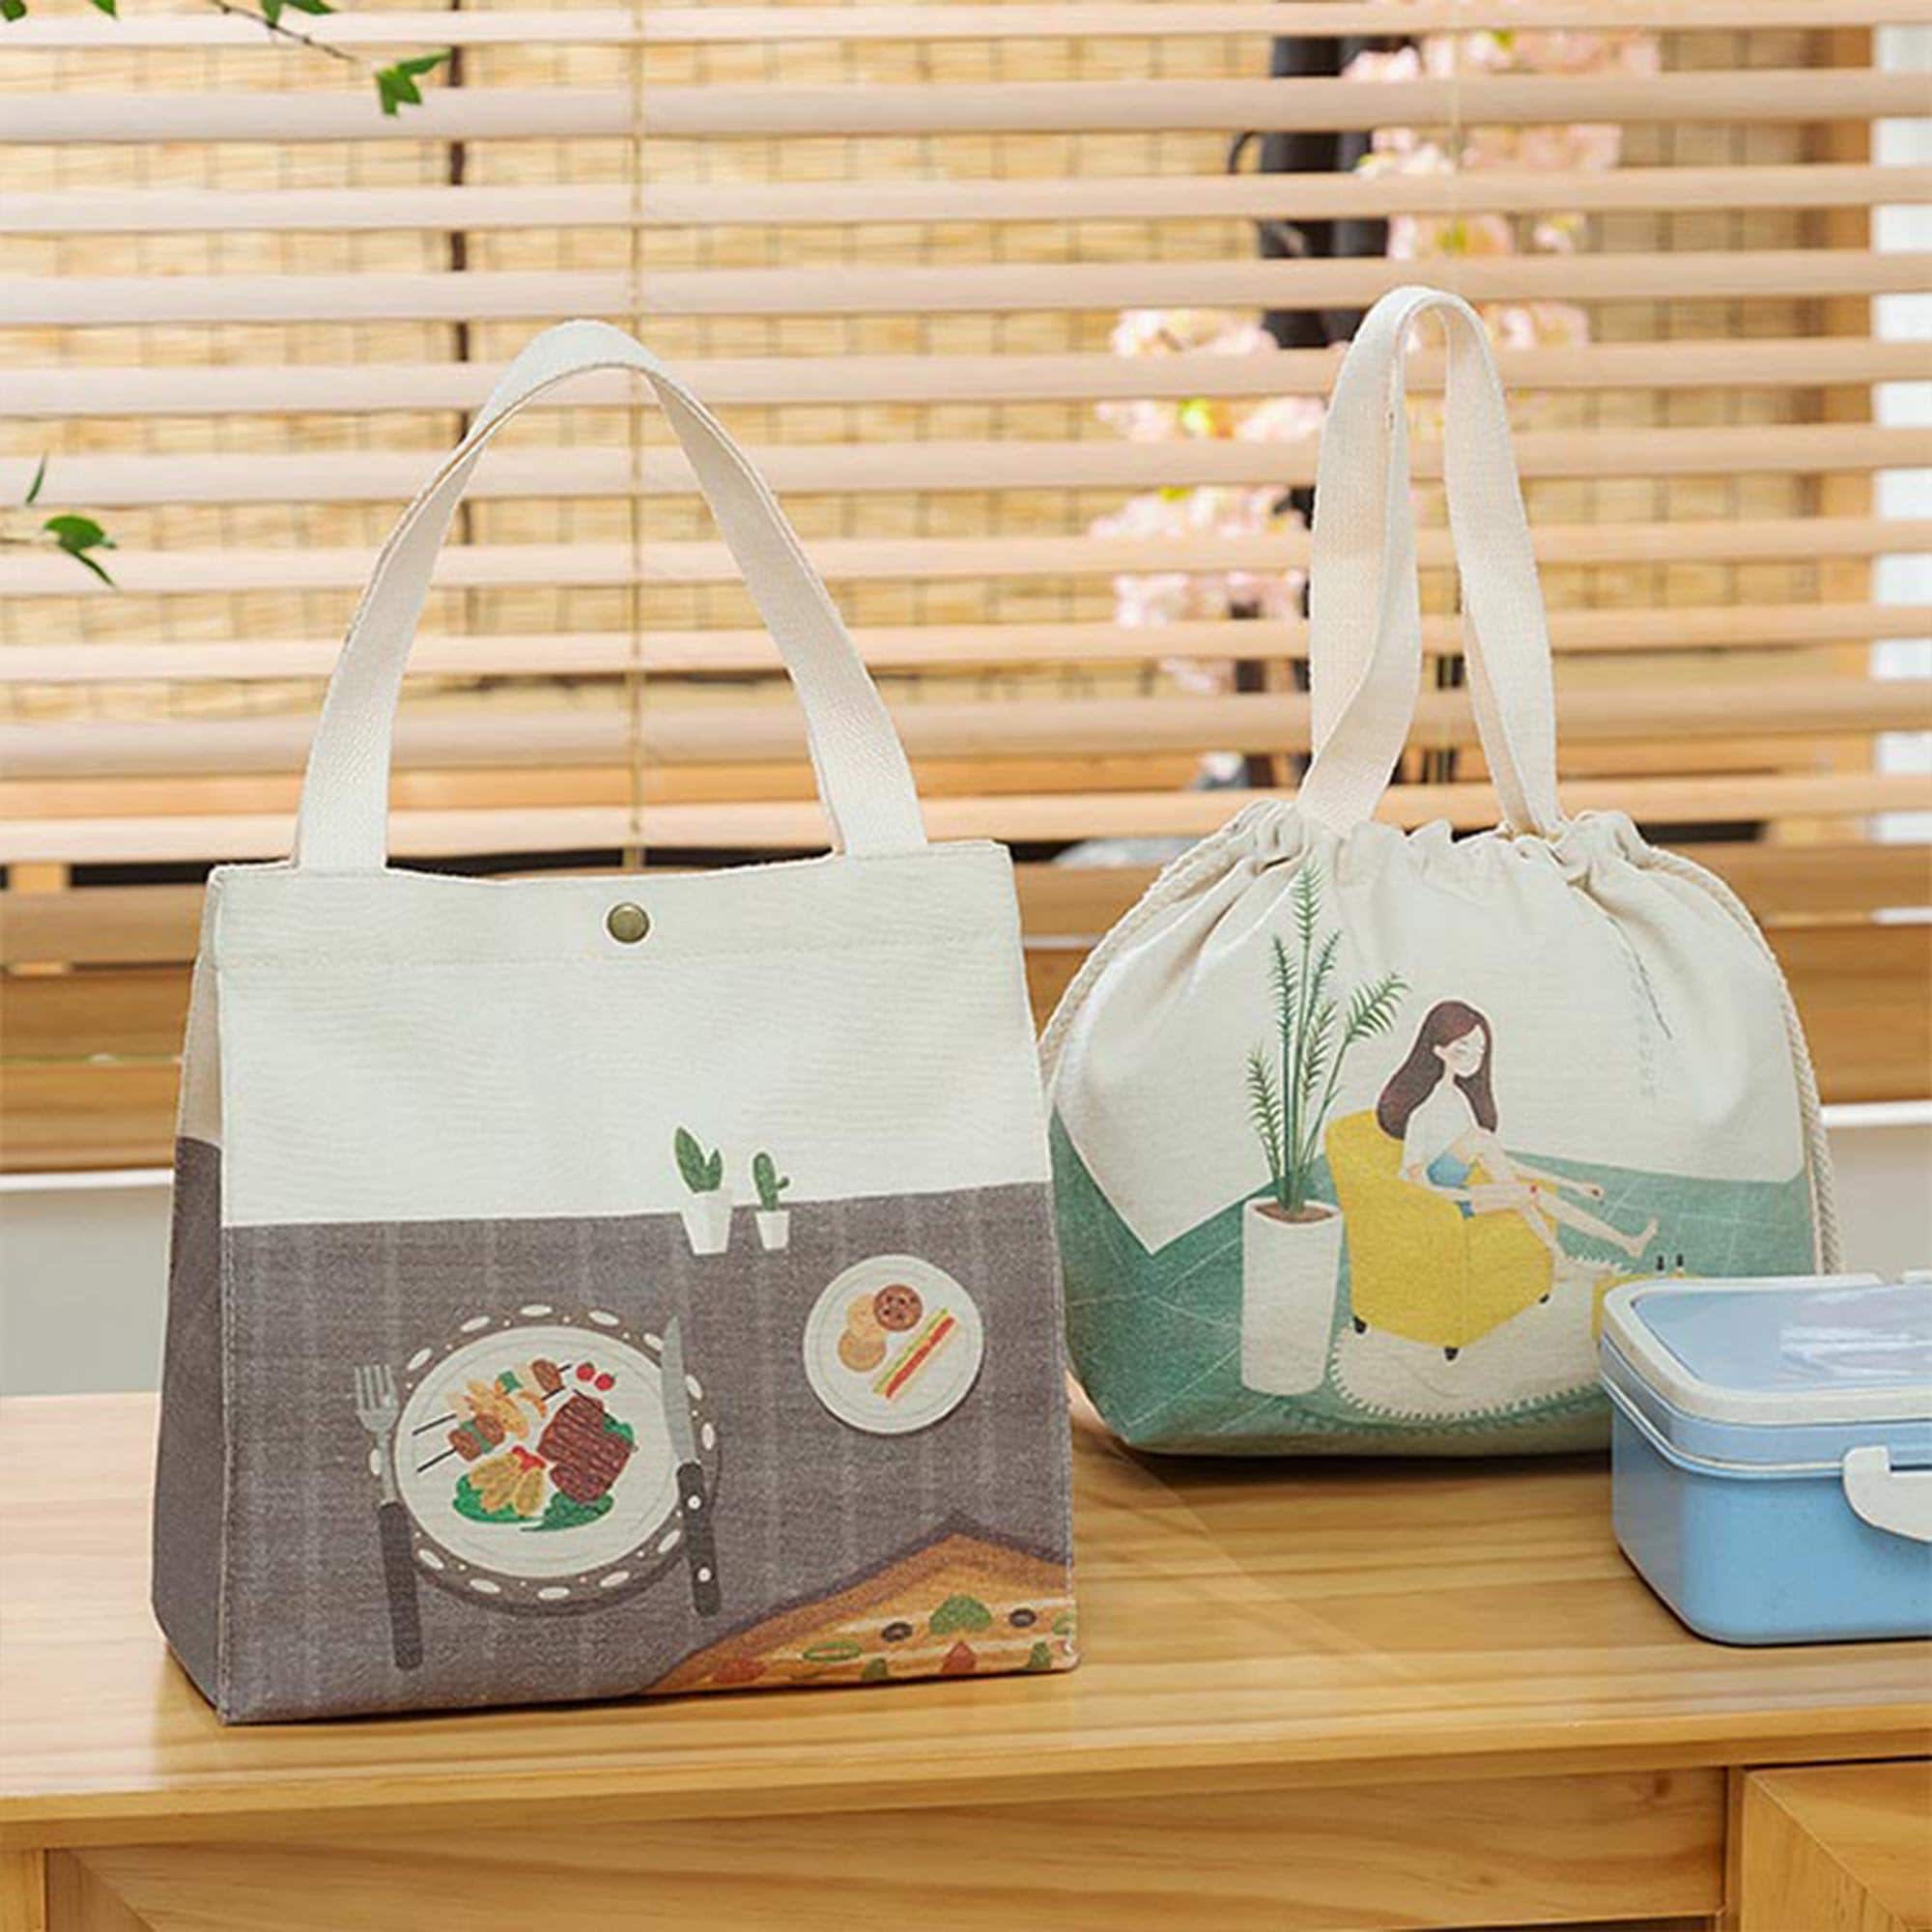 Japanese Lunch Tote Baglunch Bag for Women Insulatedcanvas 